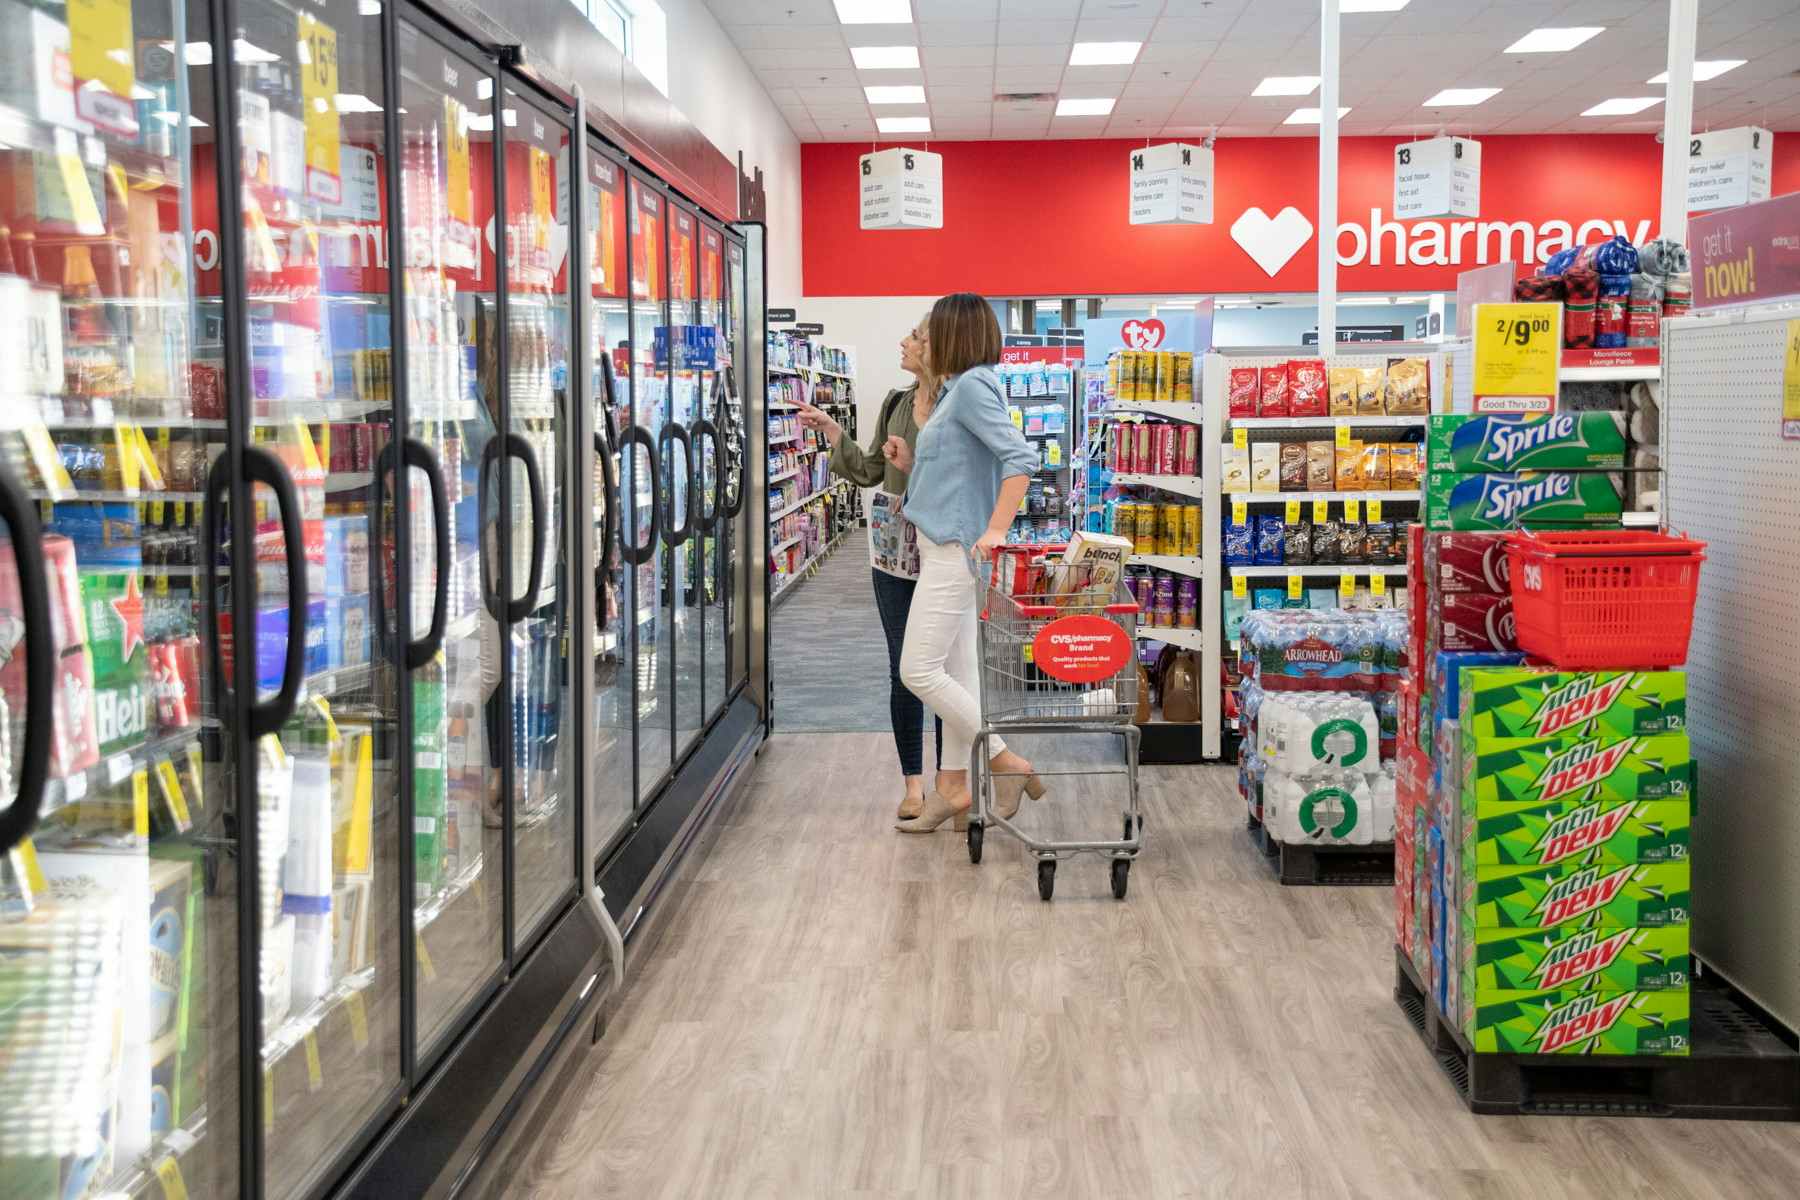 two people in cvs shopping near coolers with pharmacy in the background